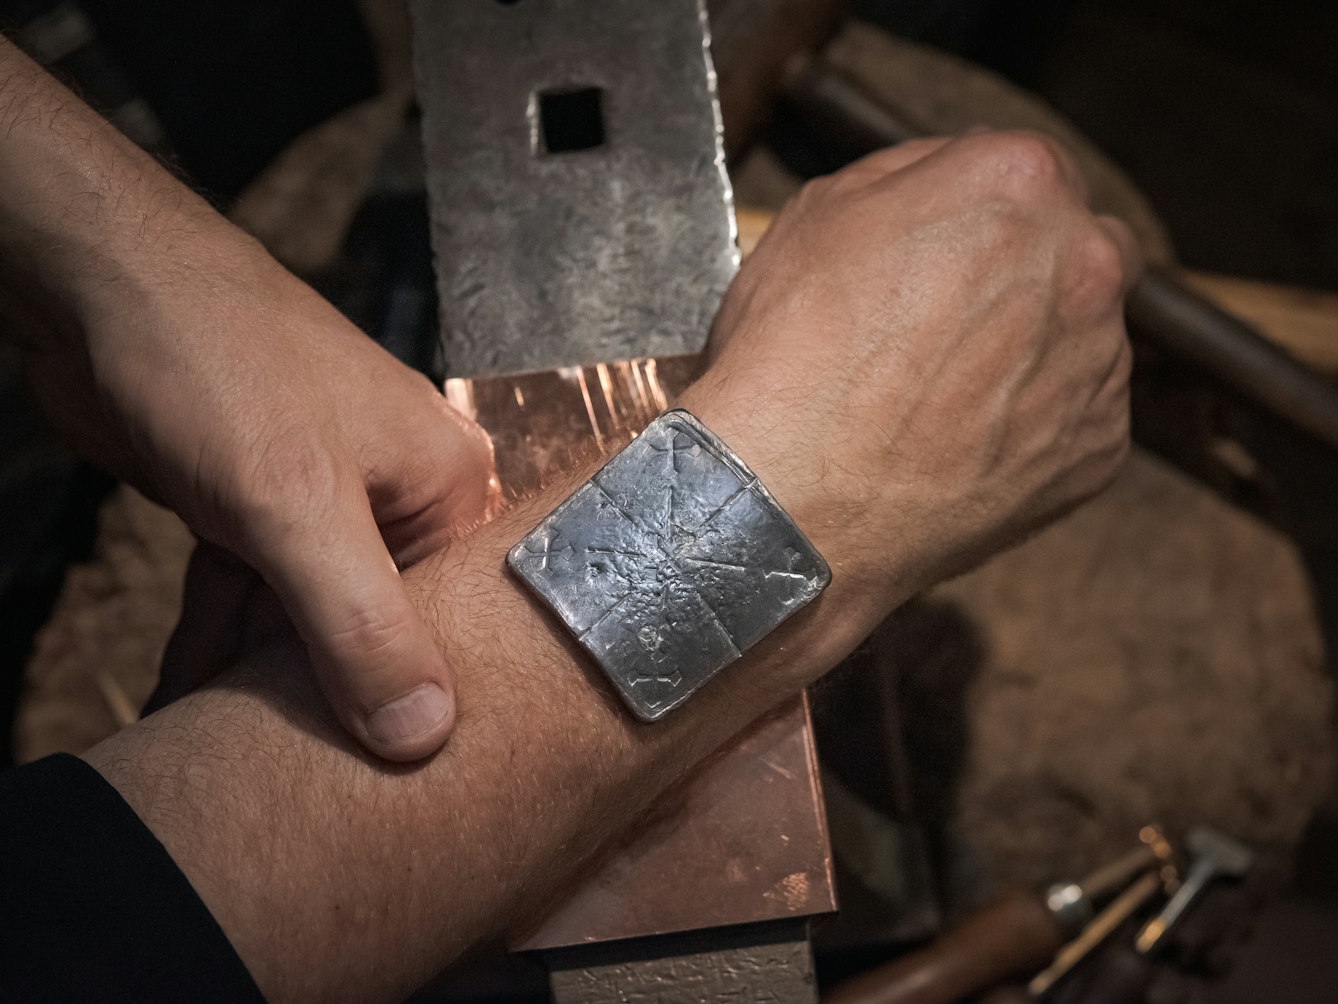 Photograph of the lead healing plate placed on the wrist of a man.  The wrist is resting on an anvil. Inscribed on the lead plate are five crosses, representing the five wounds of Christ. 